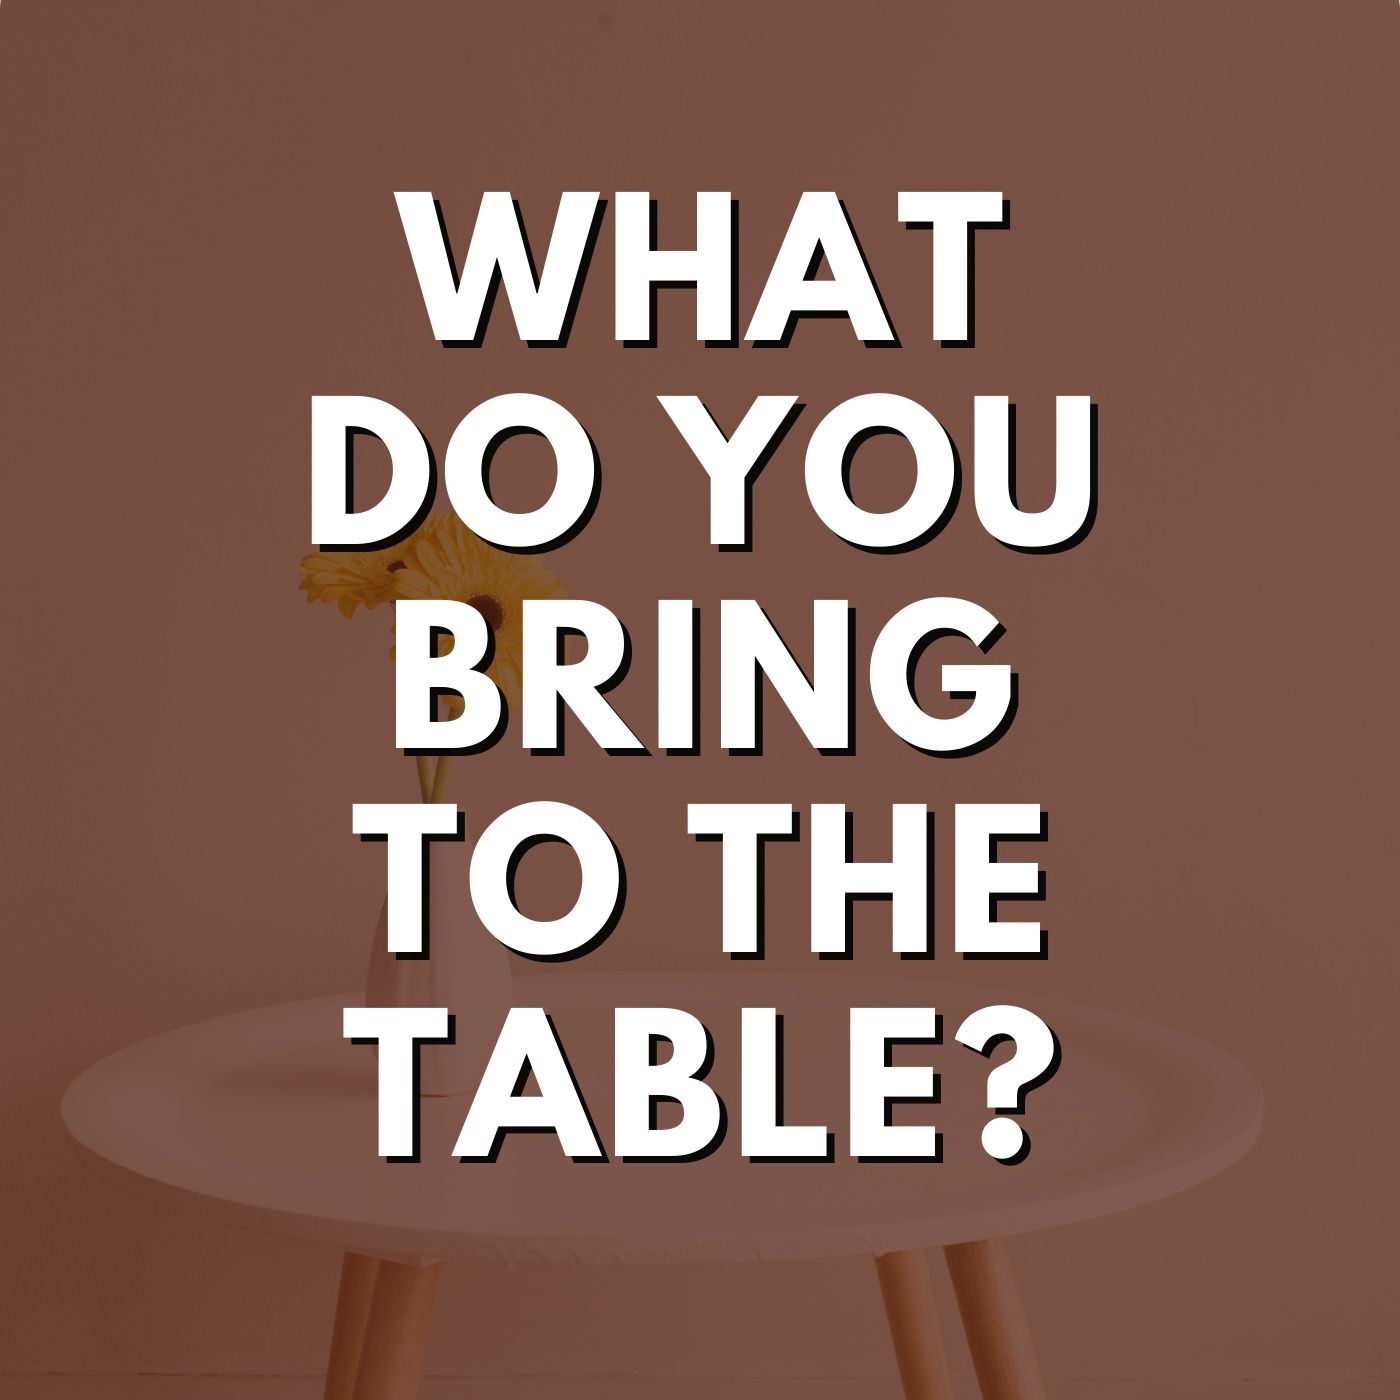 What Do You Bring to The Table?